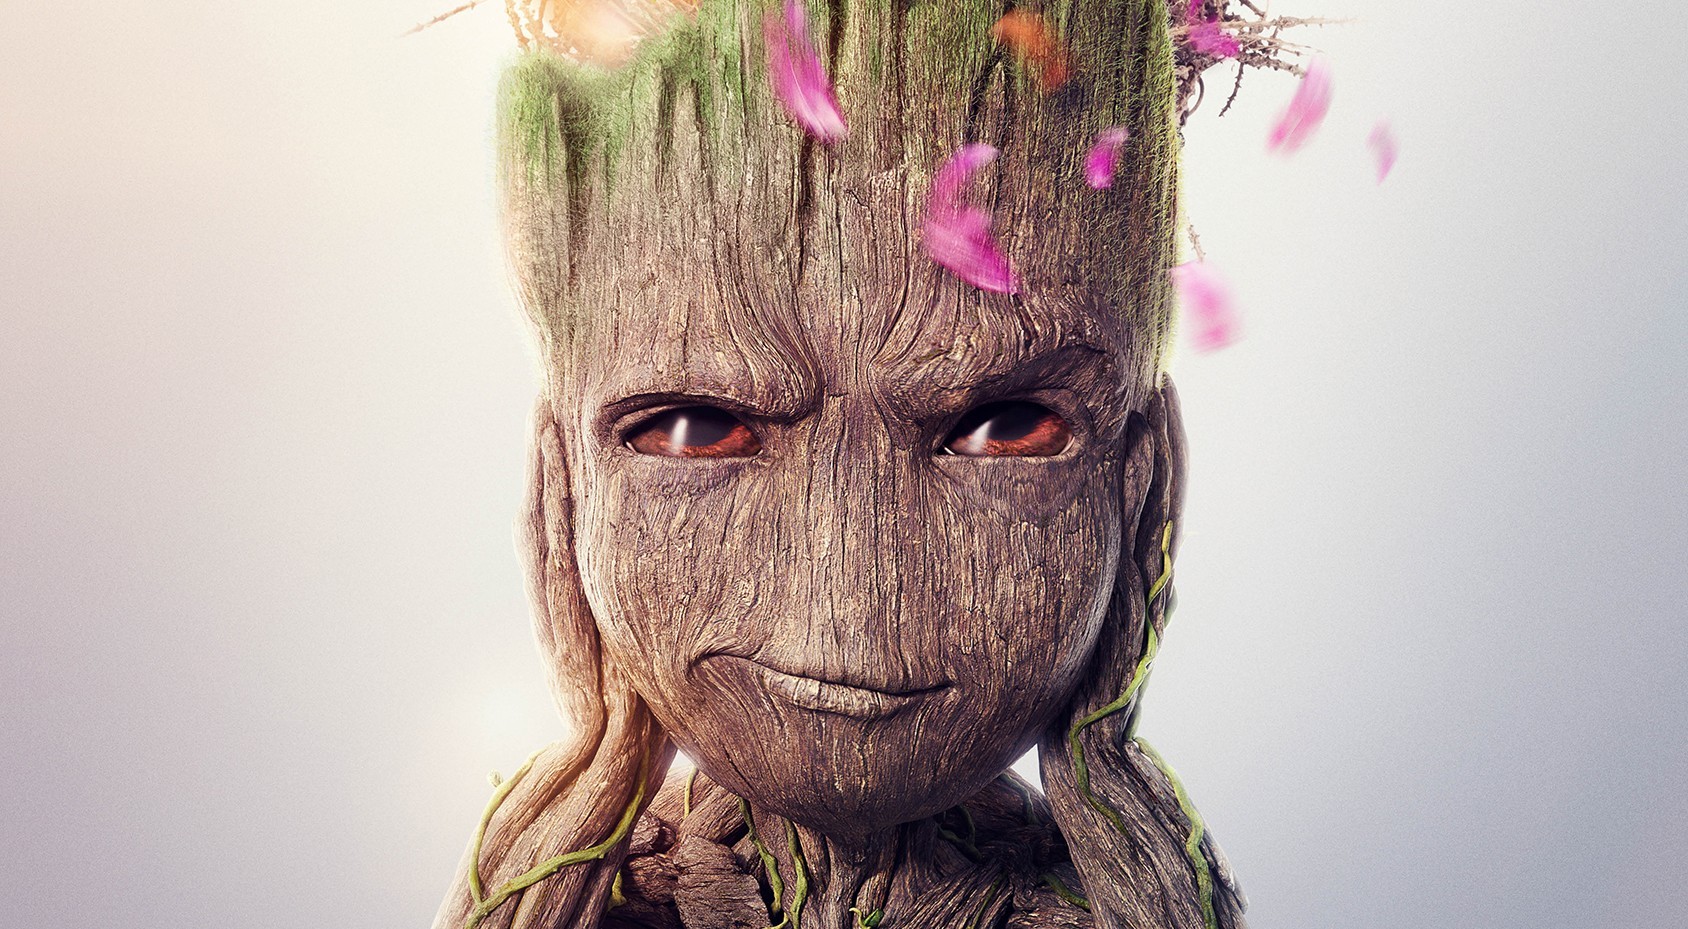 I Am Groot season 2 review.  opinion, rating.  Pros and Cons.  New animated series from the MCU.  Vin Diesel.  marvel.  Disney +